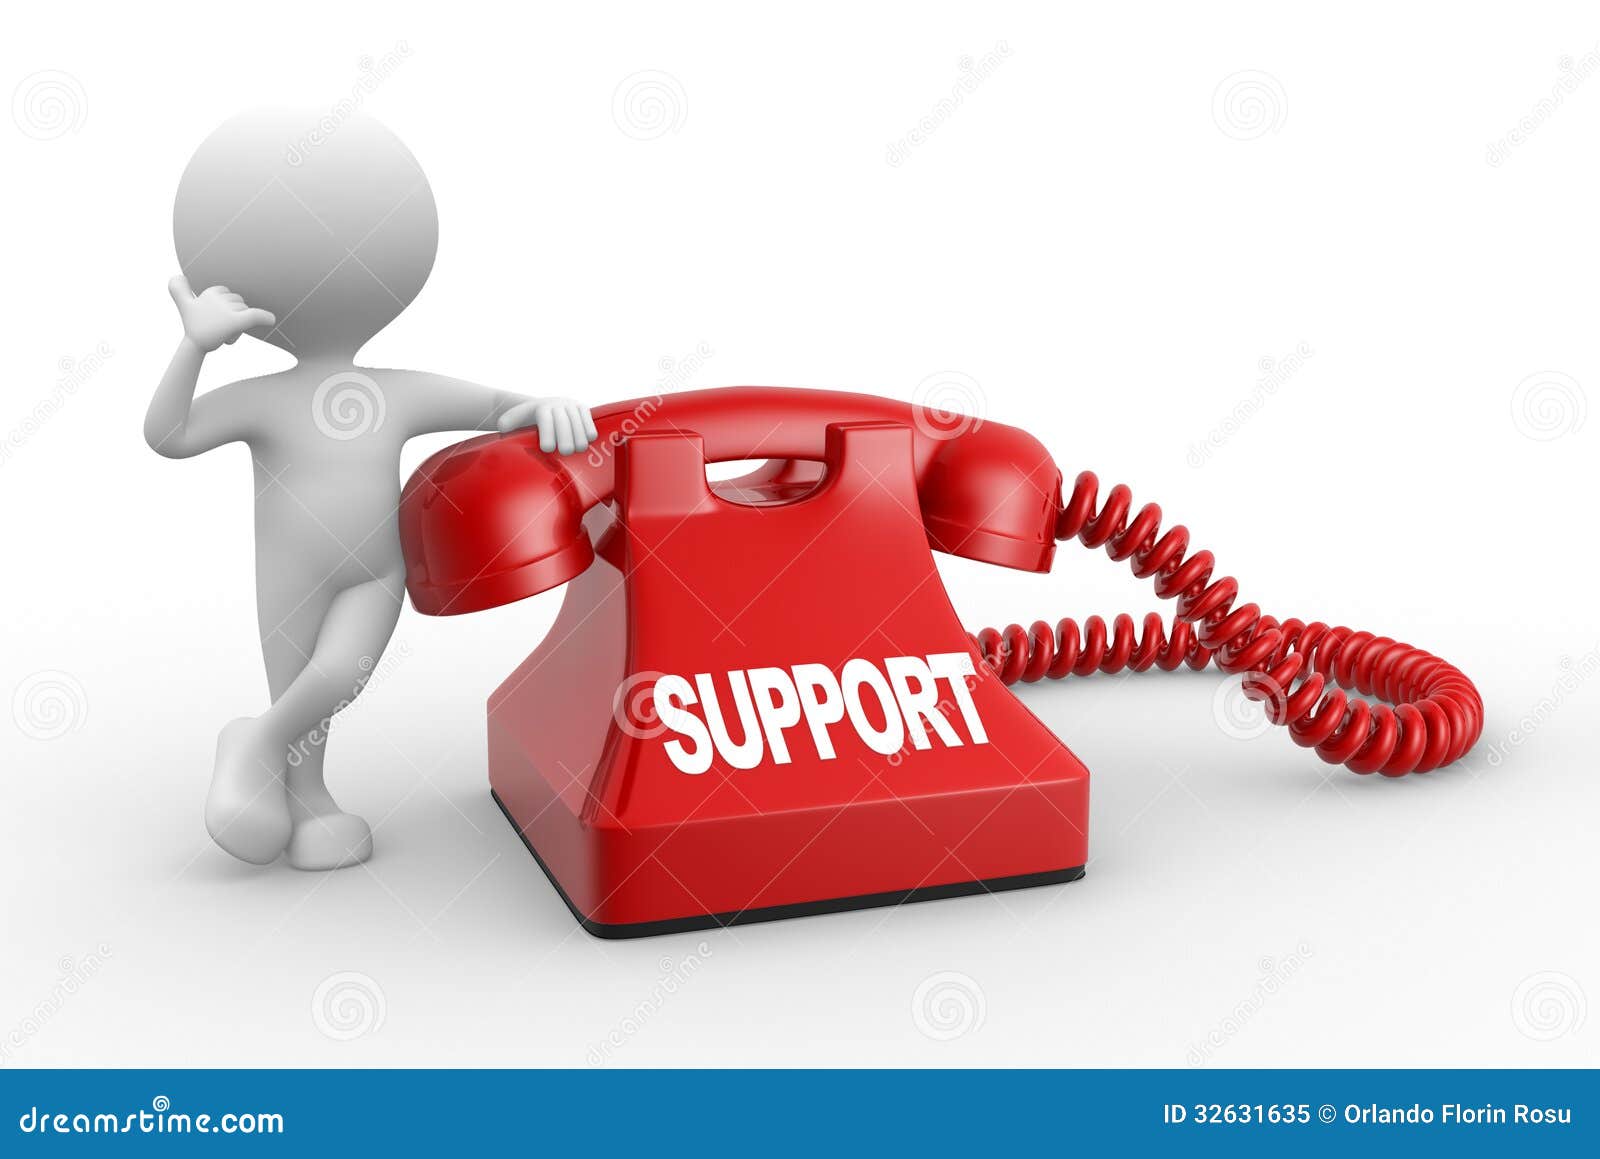 phone support clipart - photo #15